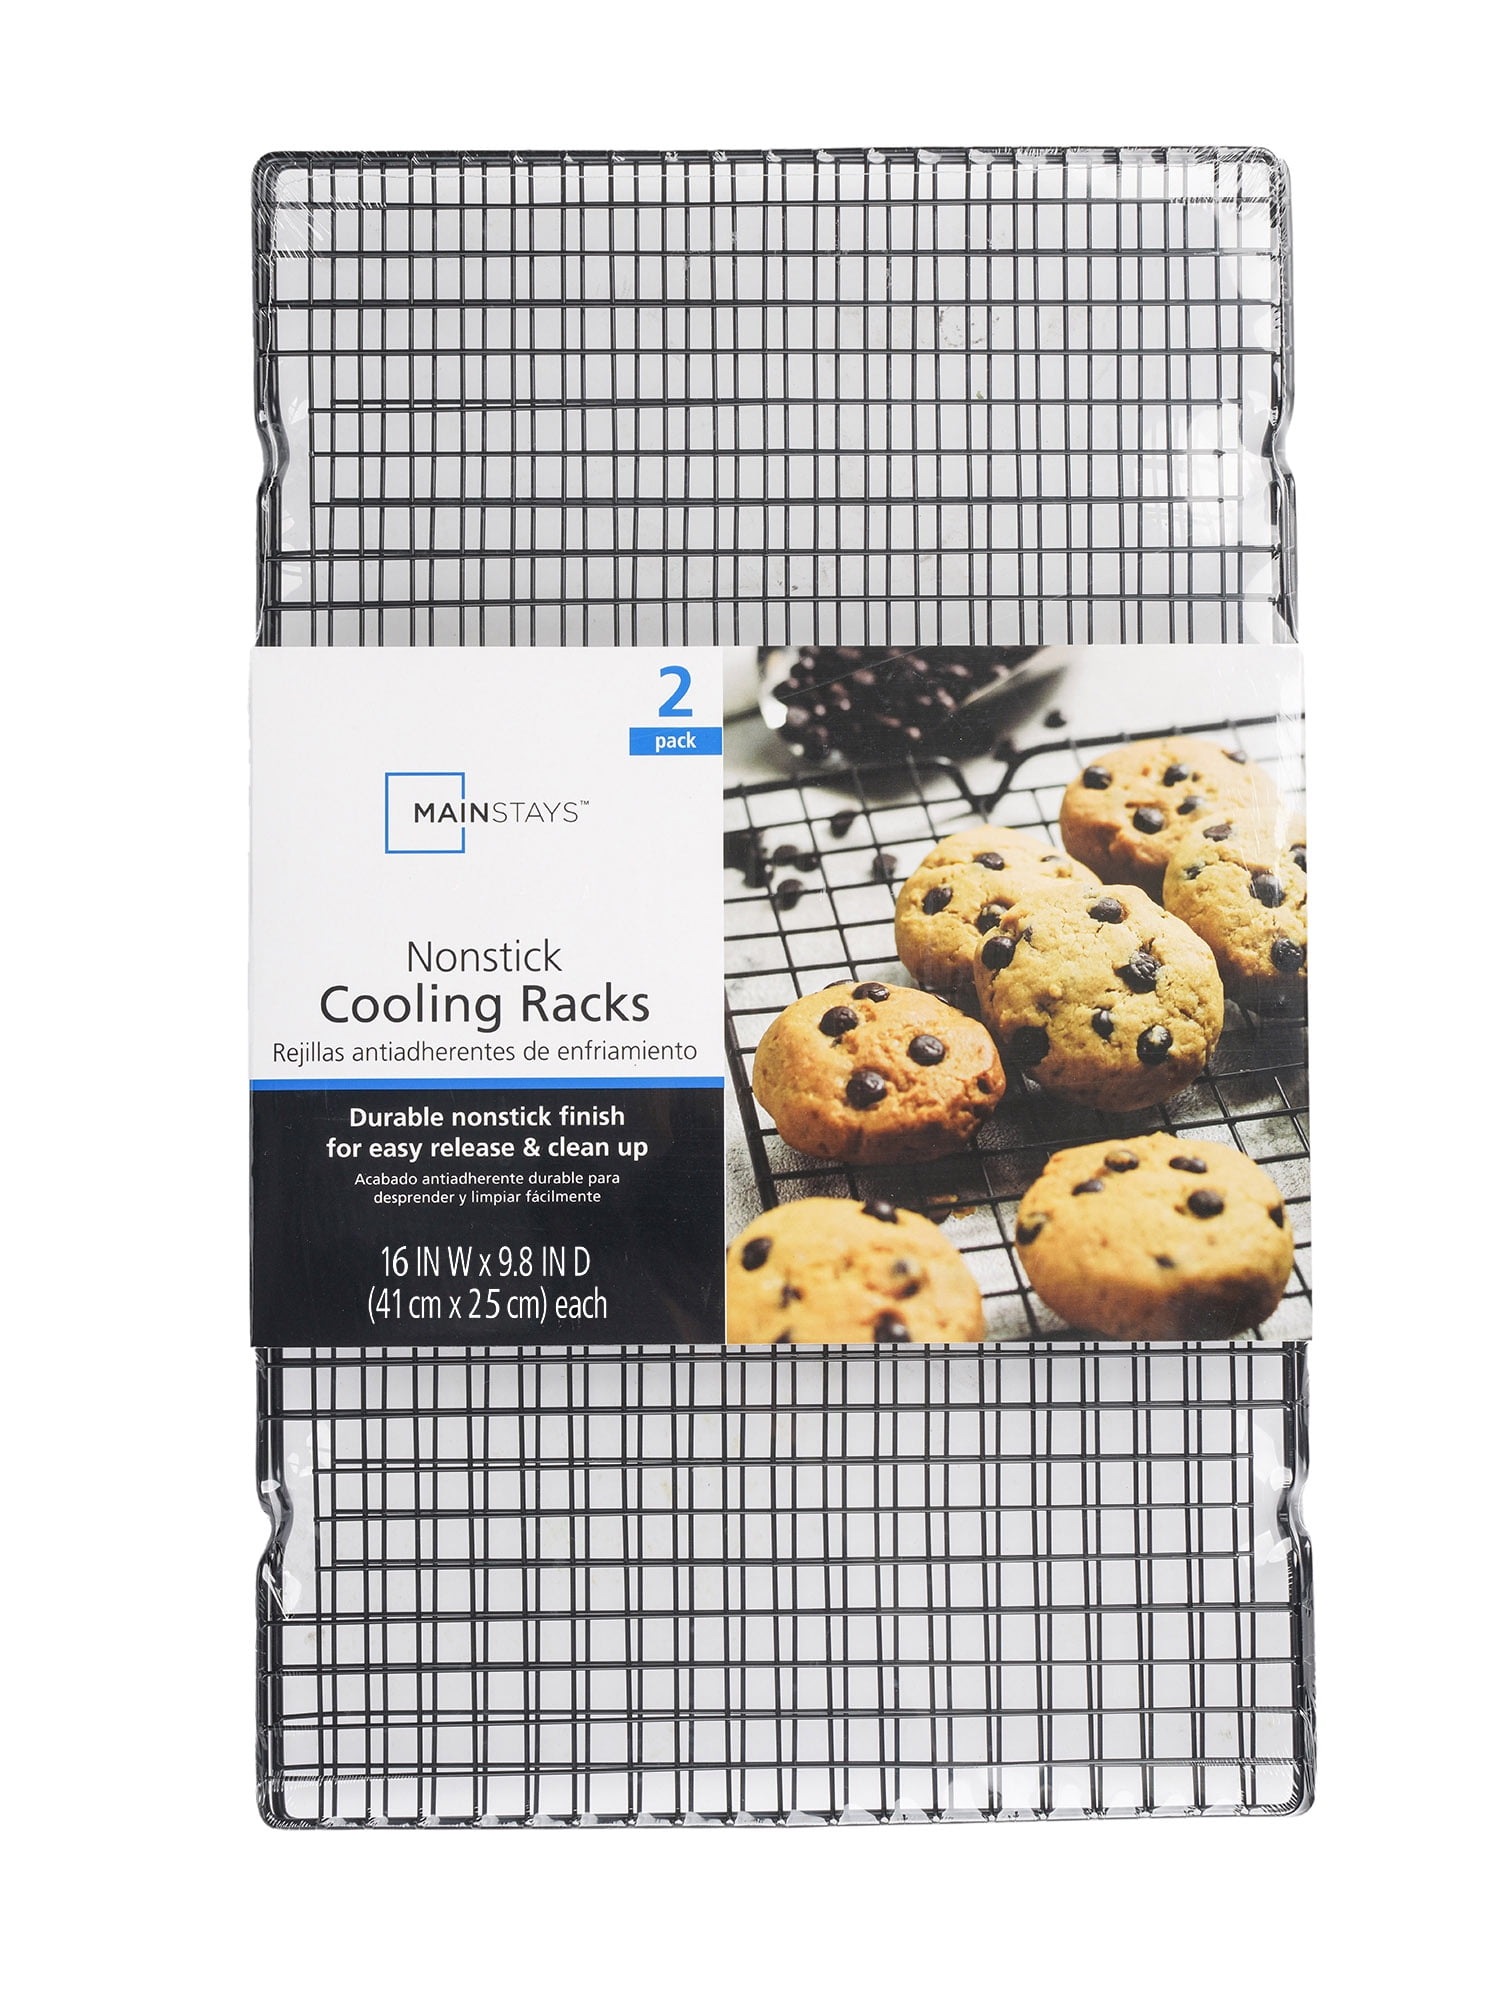 OXO Good Grips Non-Stick Pro Cooling Rack and Baking Rack,Metal